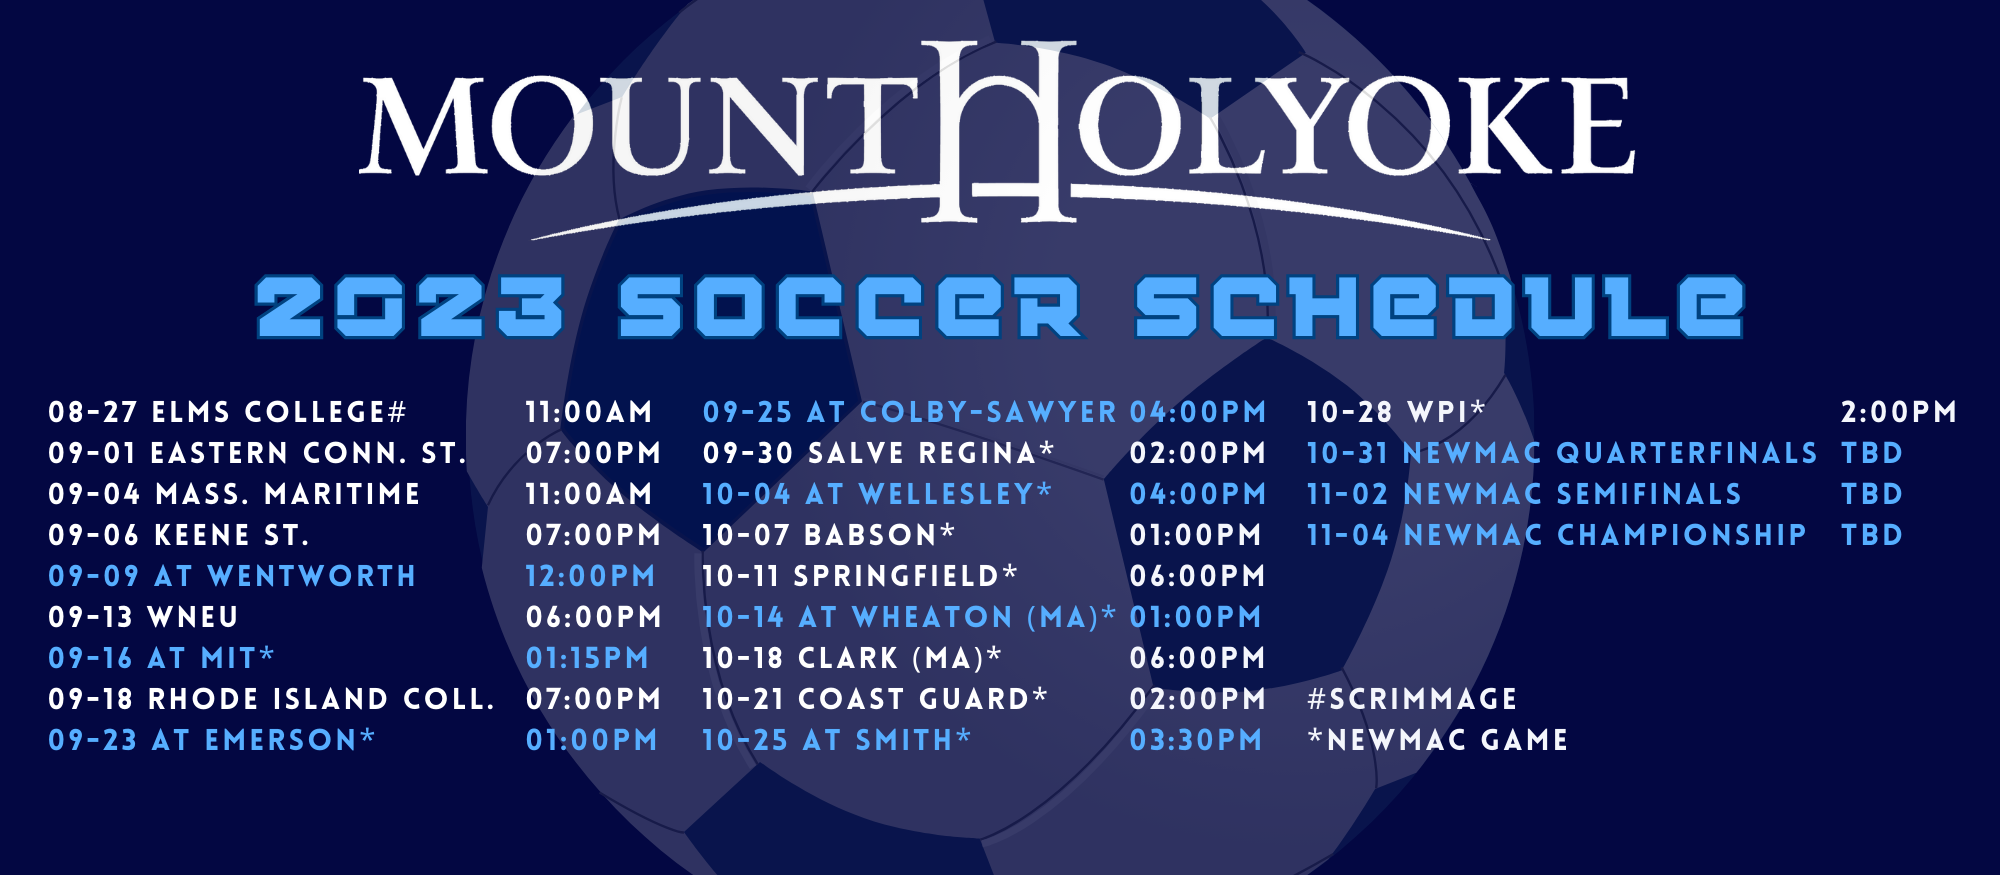 Mount Holyoke soccer opens season with scrimmage and three home games